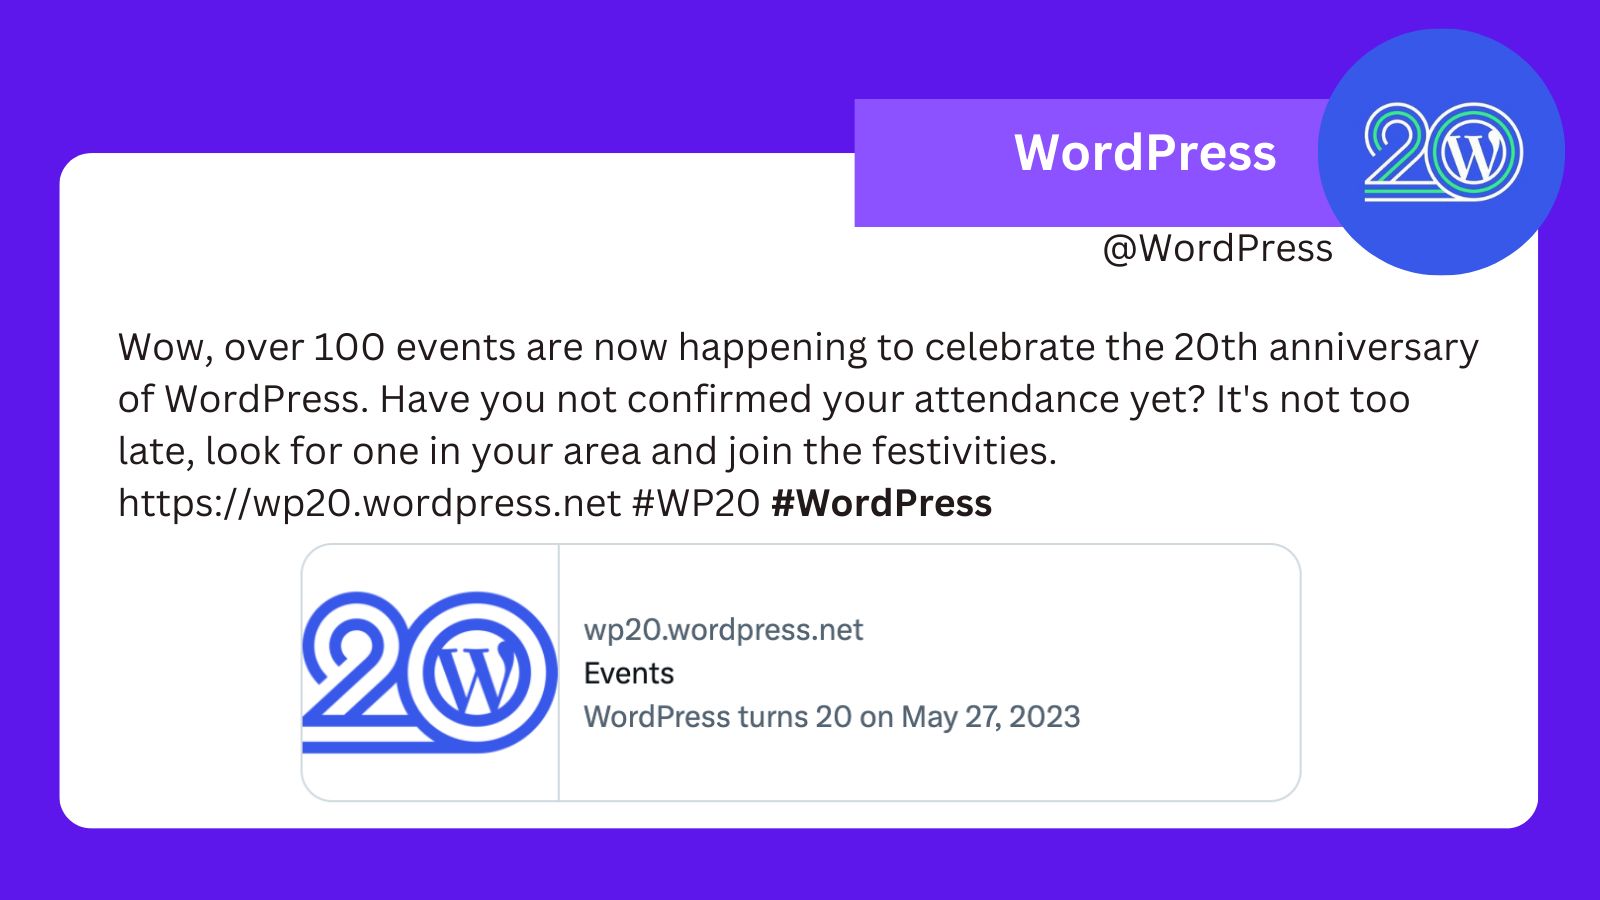 A tweet from WordPress that reads: Wow, over 100 events are now happening to celebrate the 20th anniversary of WordPress. Have you not confirmed your attendance yet? It's not too late, look for one in your area and join the festivities. https://wp20.wordpress.net #WP20 #WordPress